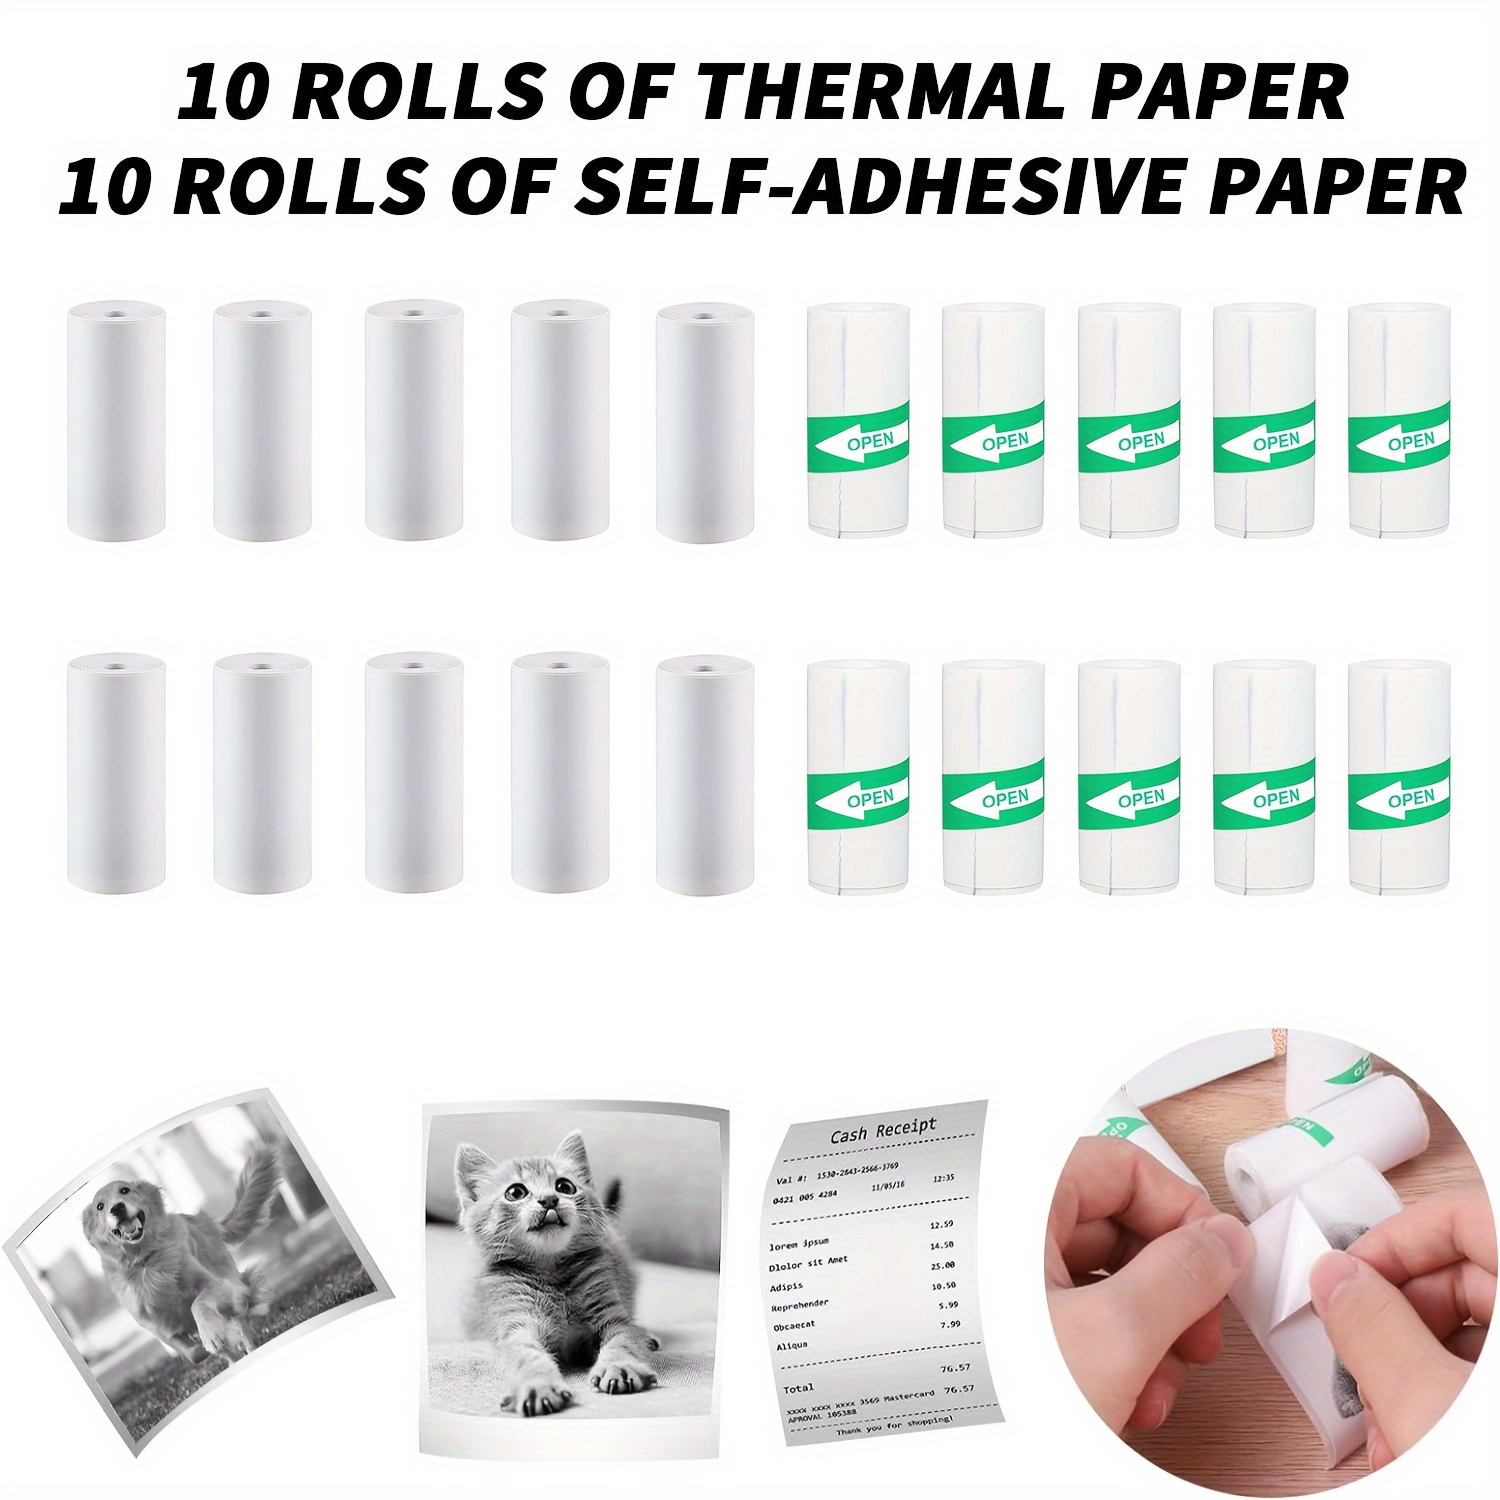 

Mini Printing Paper (10/20 Rolls Thermal Adhesive Paper), Printer Label Sticker For Wireless Study Notes, Work, Photos, Pictures, Memo No Ink Printer 57mm